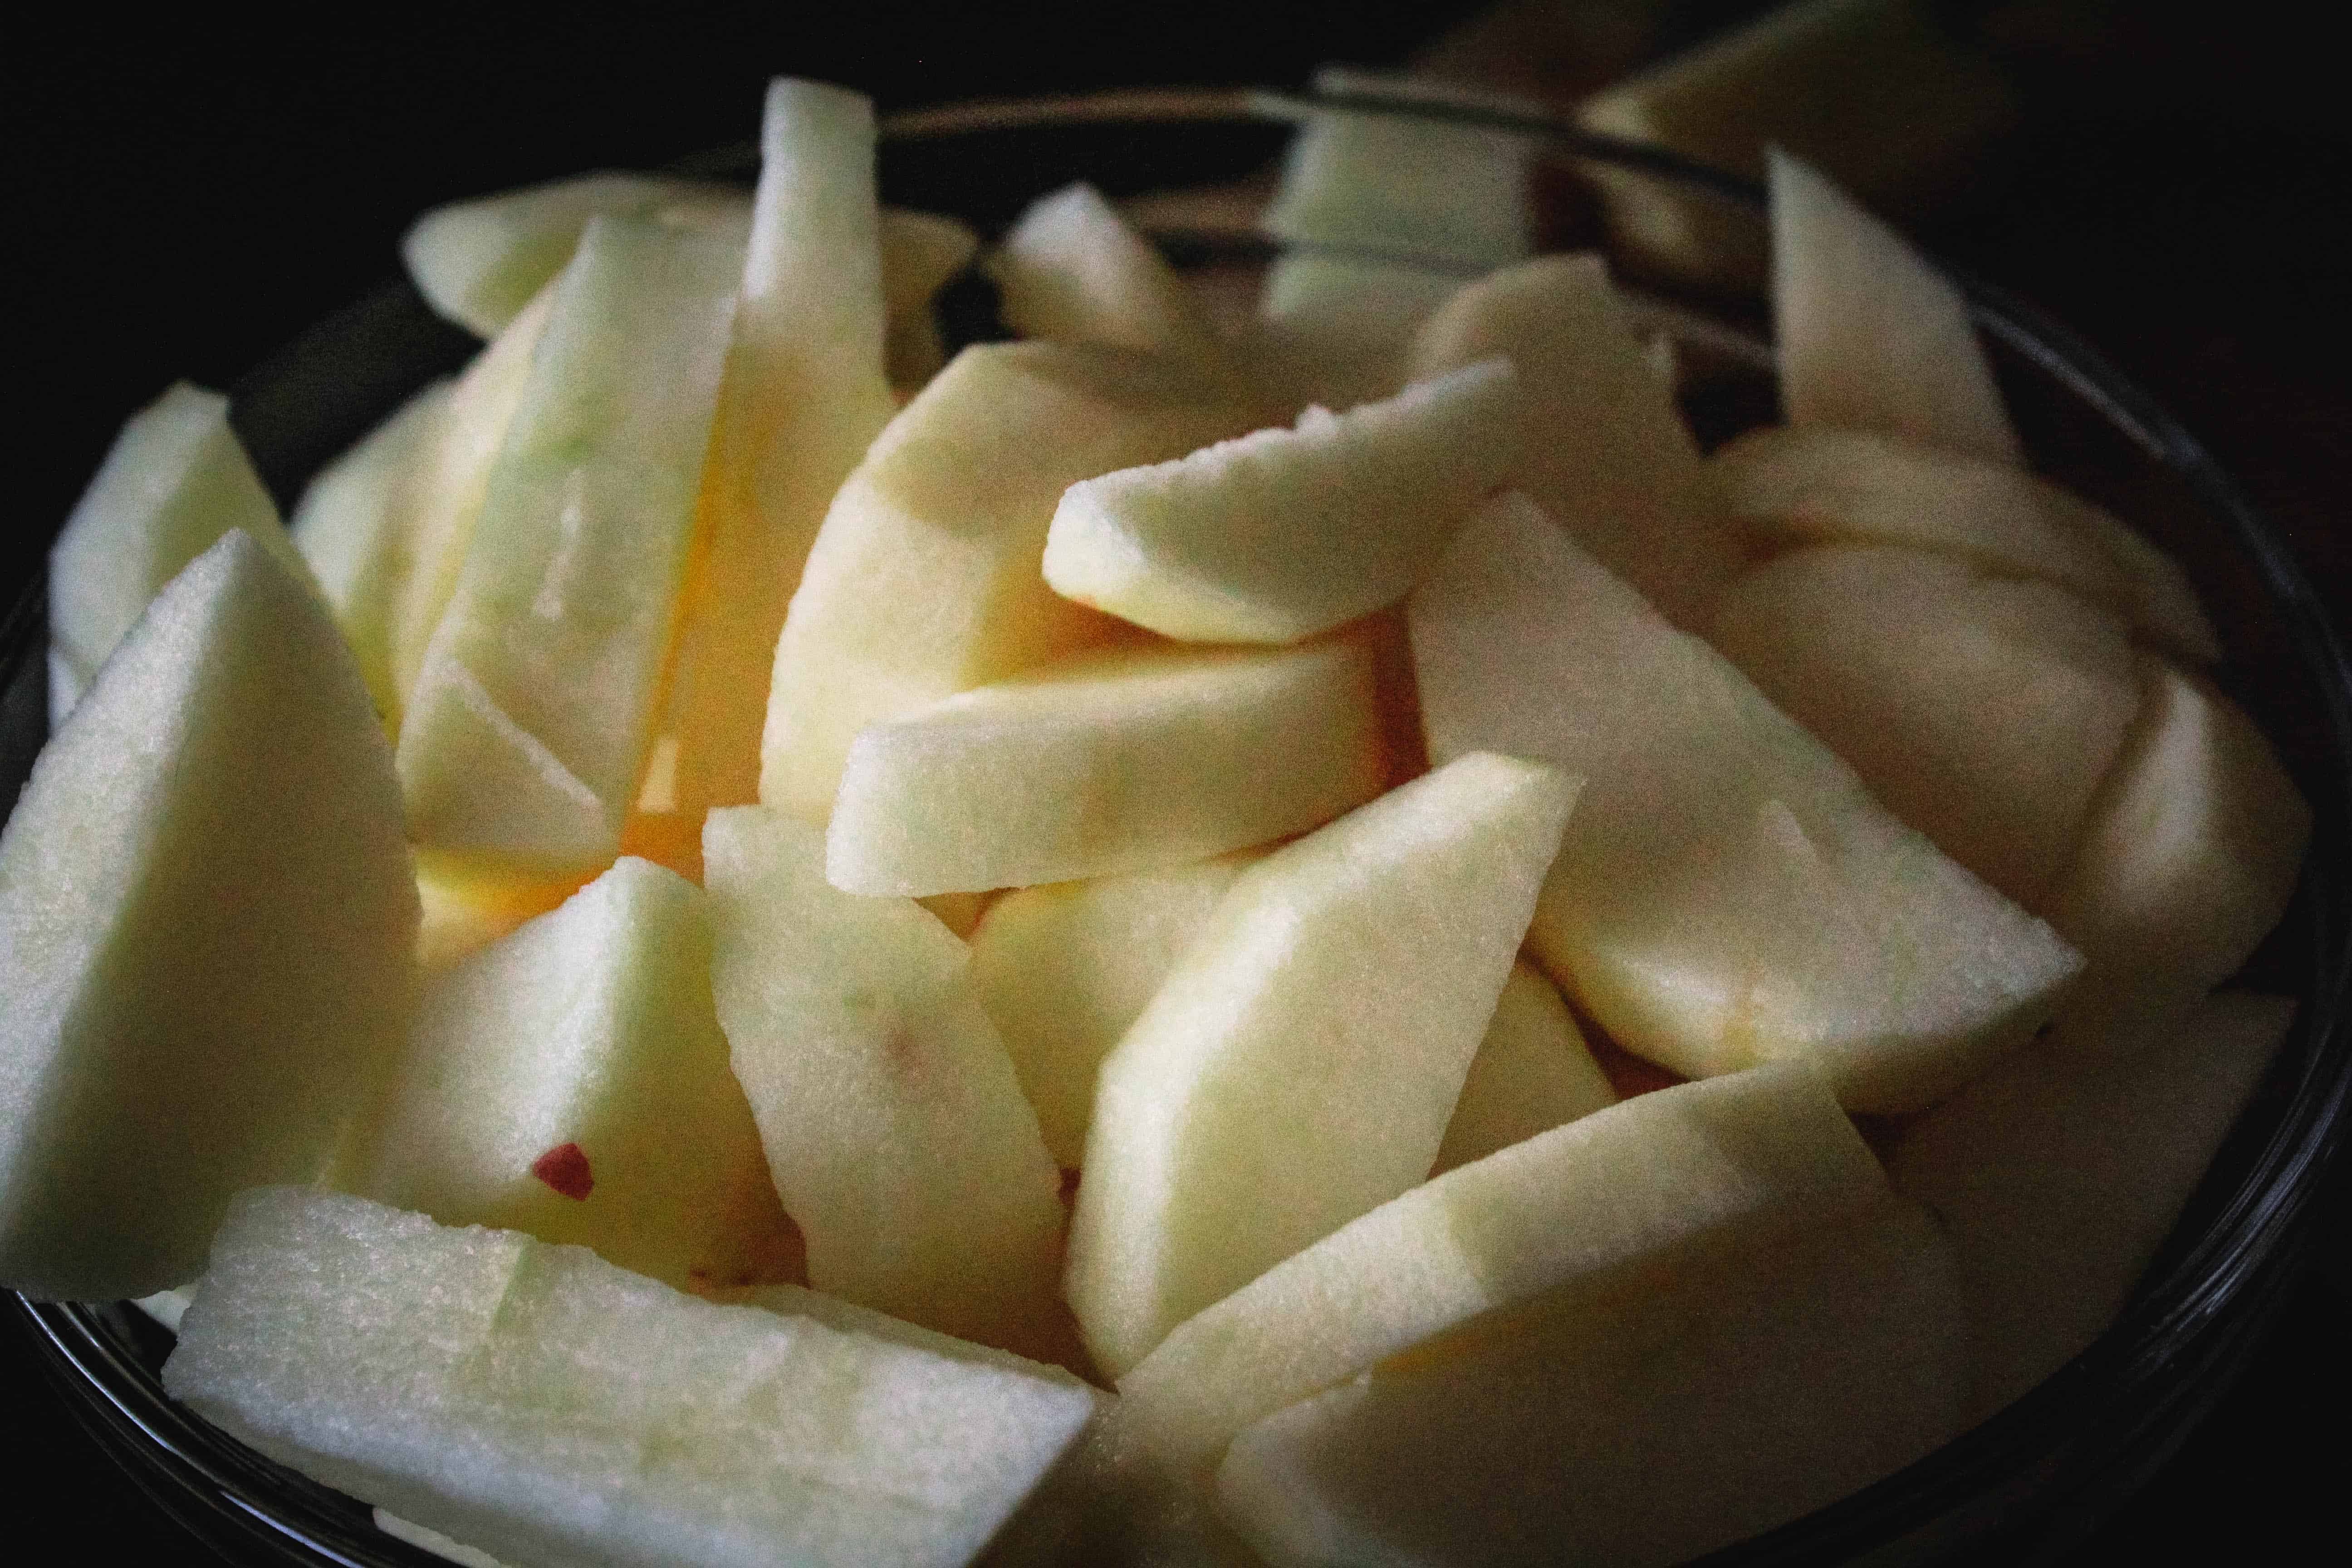 How to Make Applesauce from Scratch